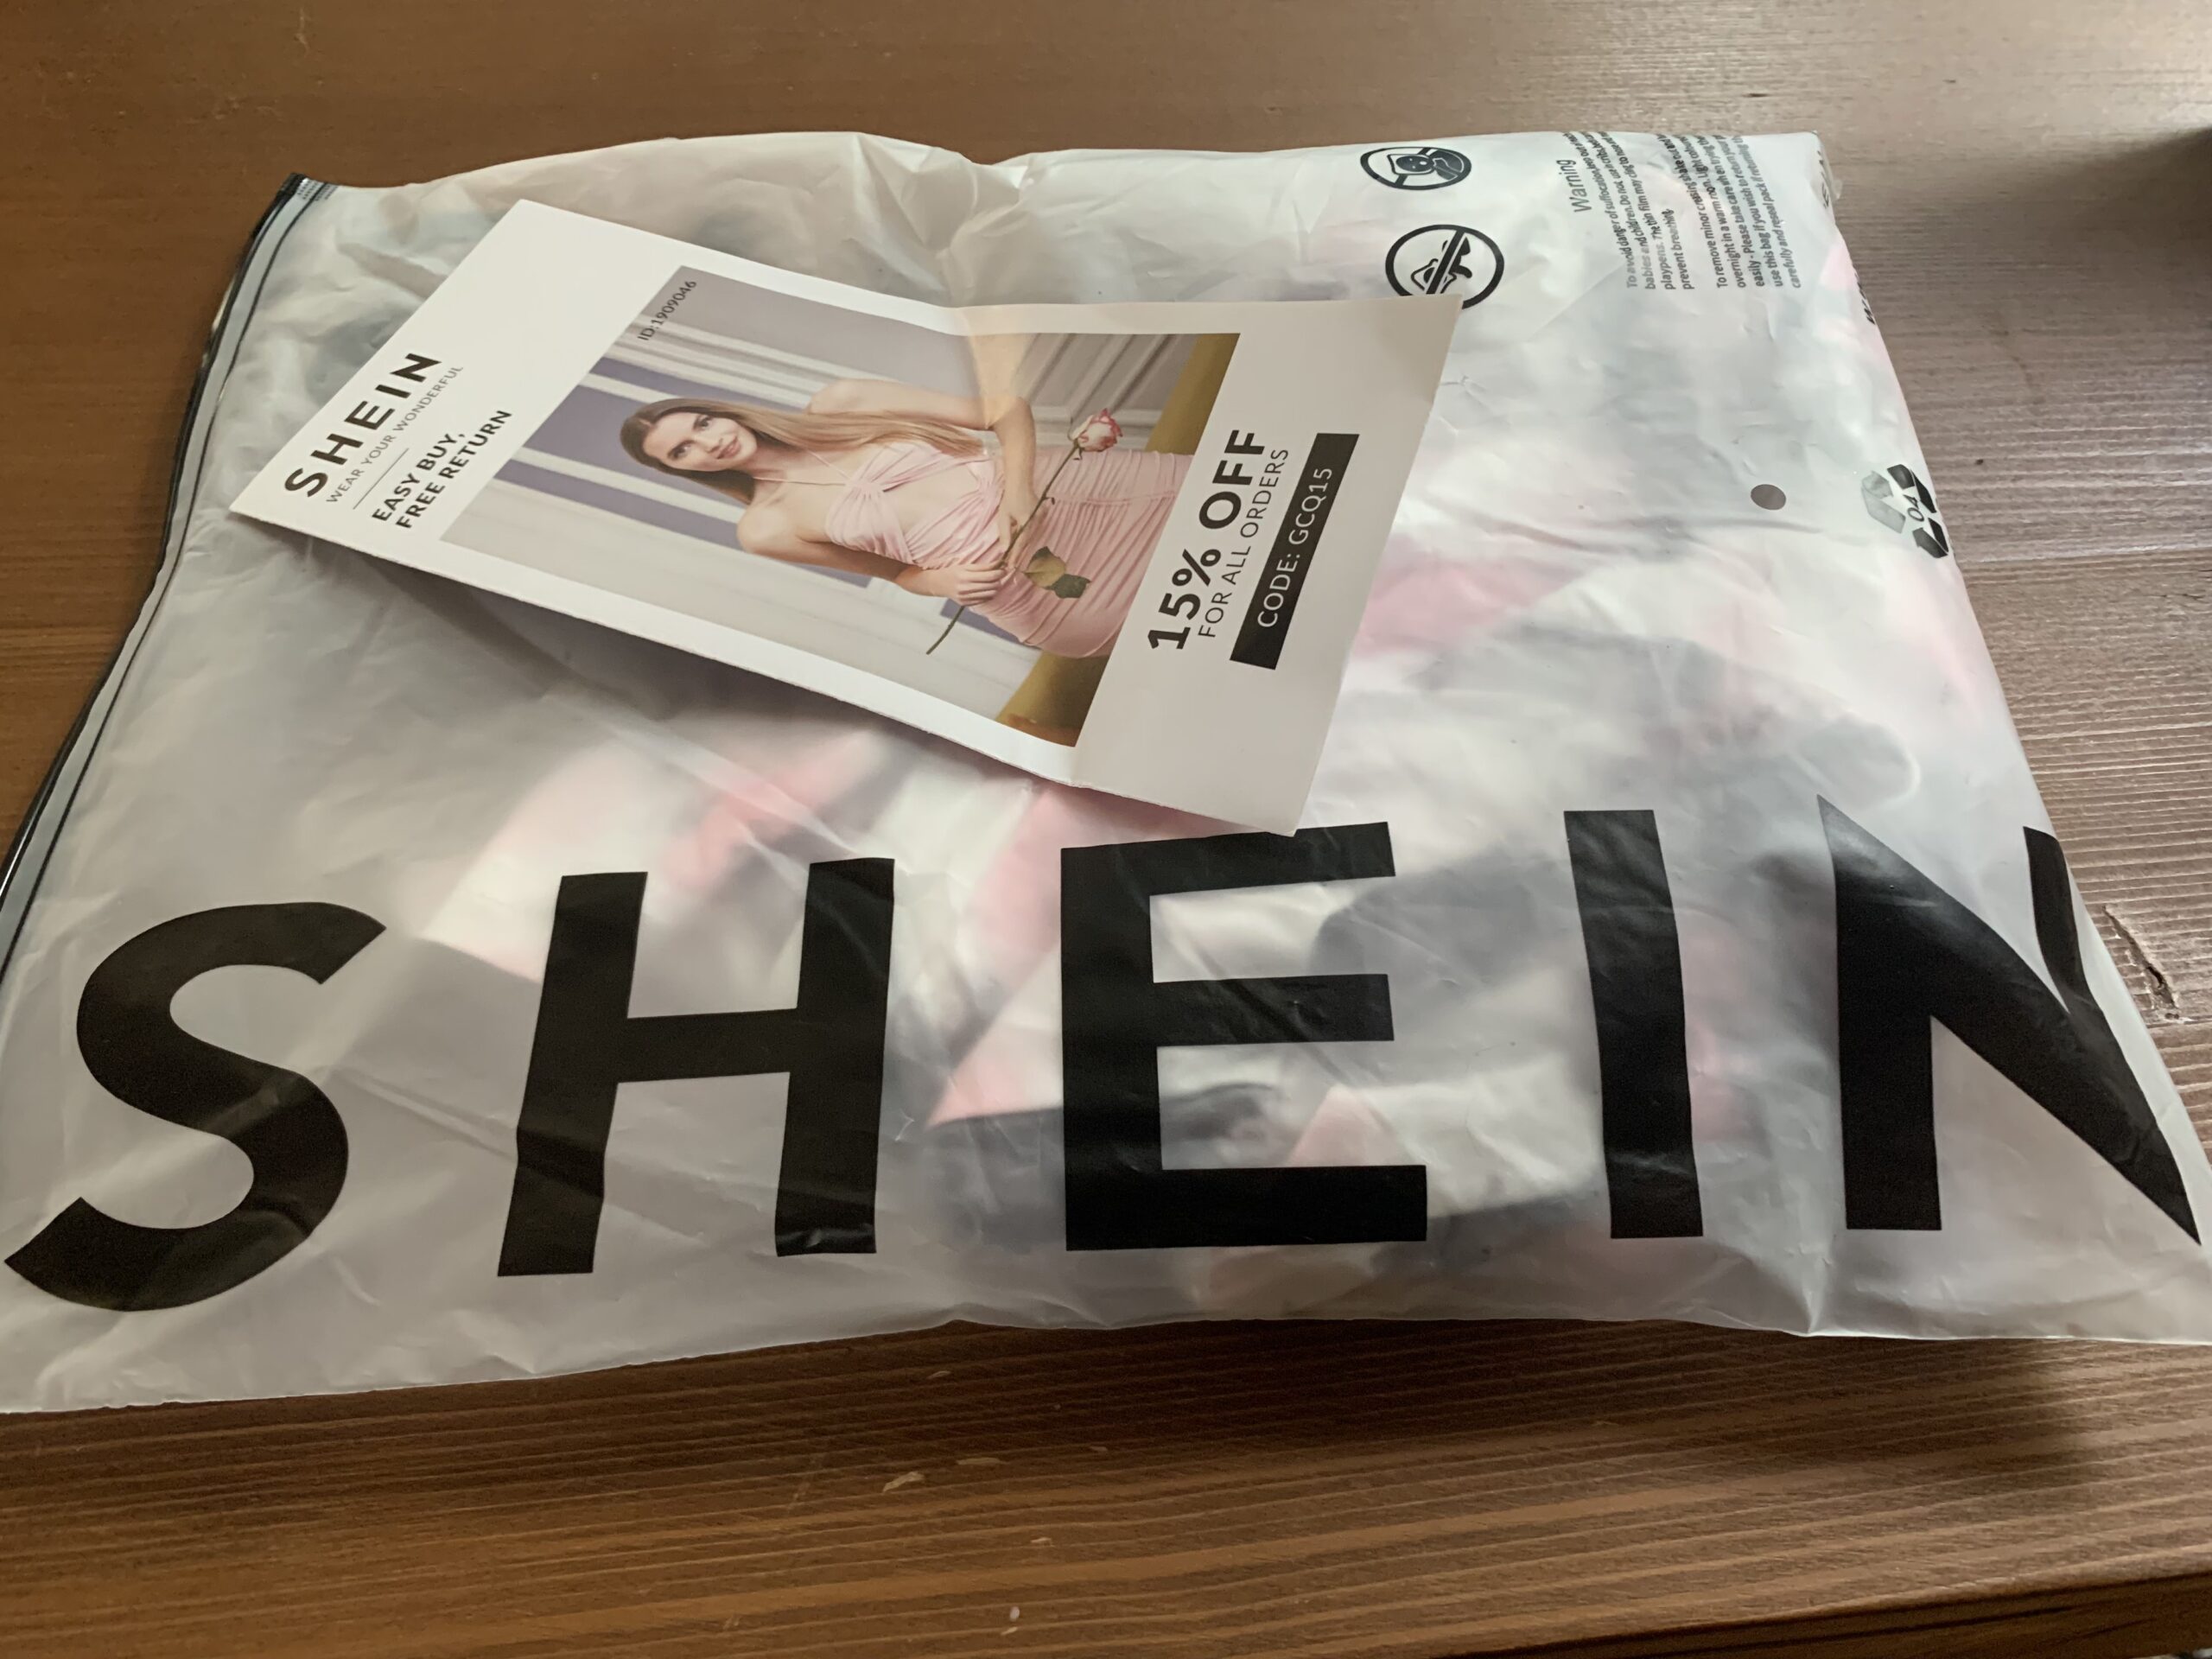 Shein is full of great deals - but also some landmines - Midlife Mama